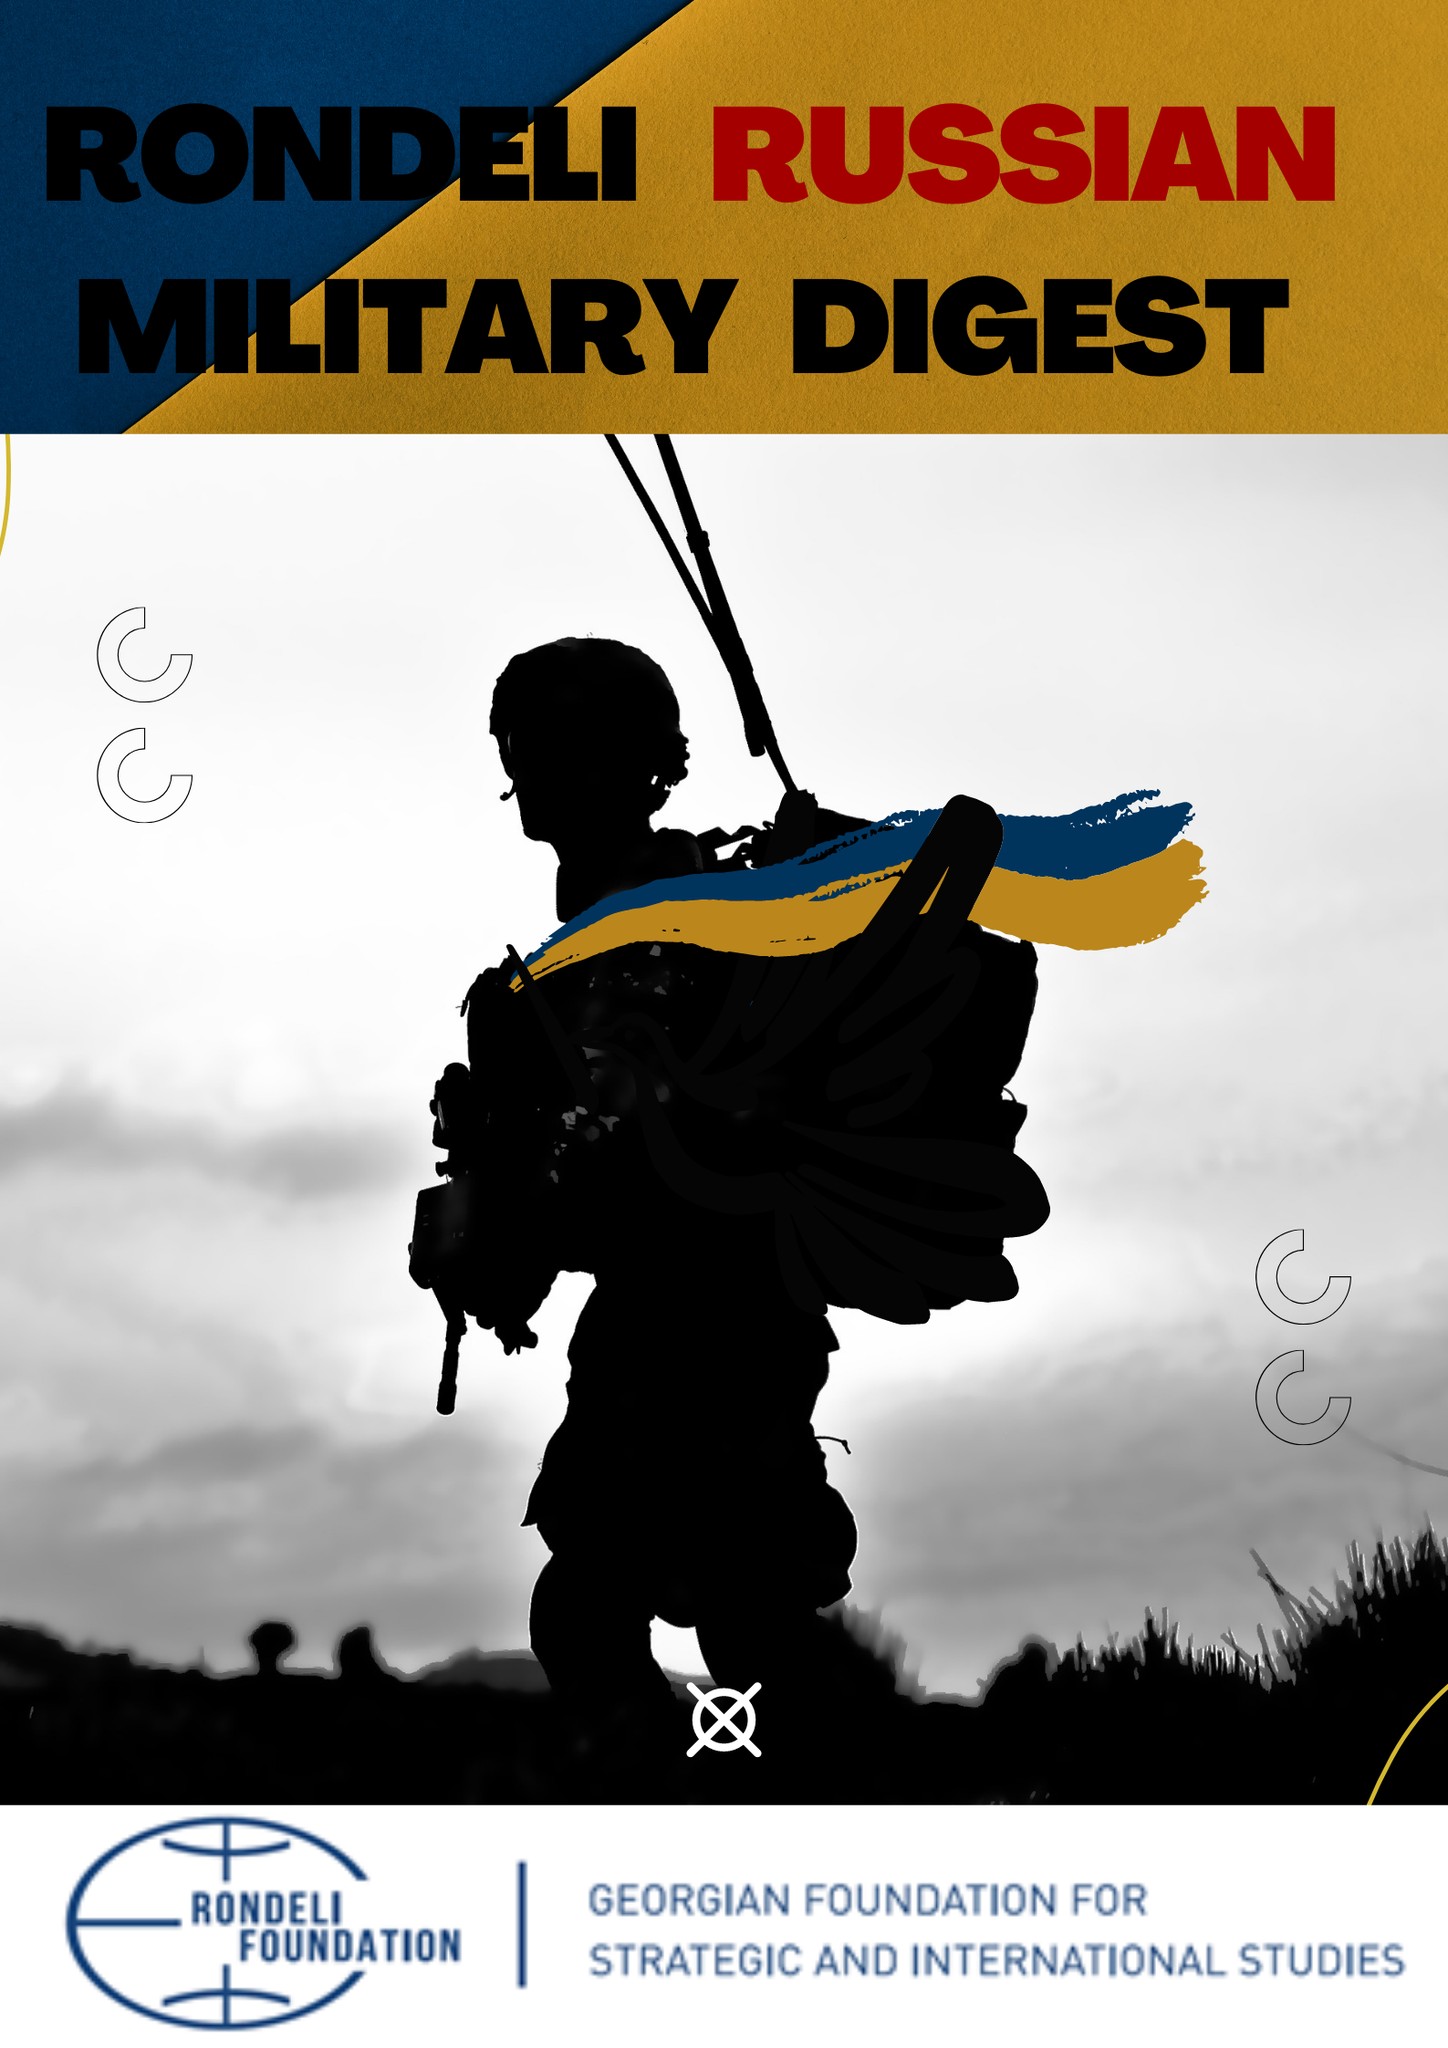 Rondeli Russian Military Digest